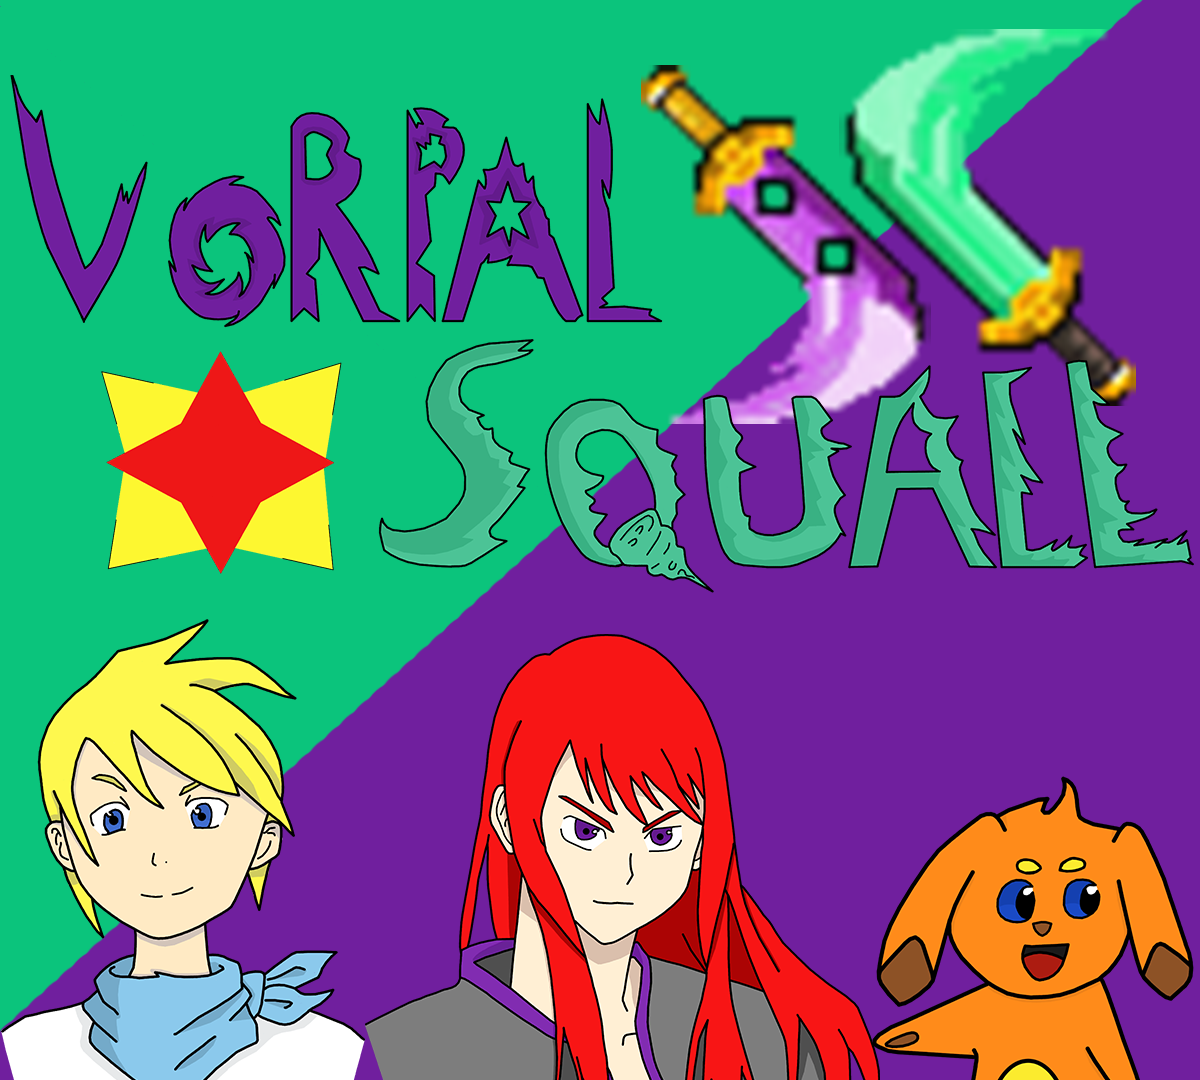 Vorpal Squall (Part 1)